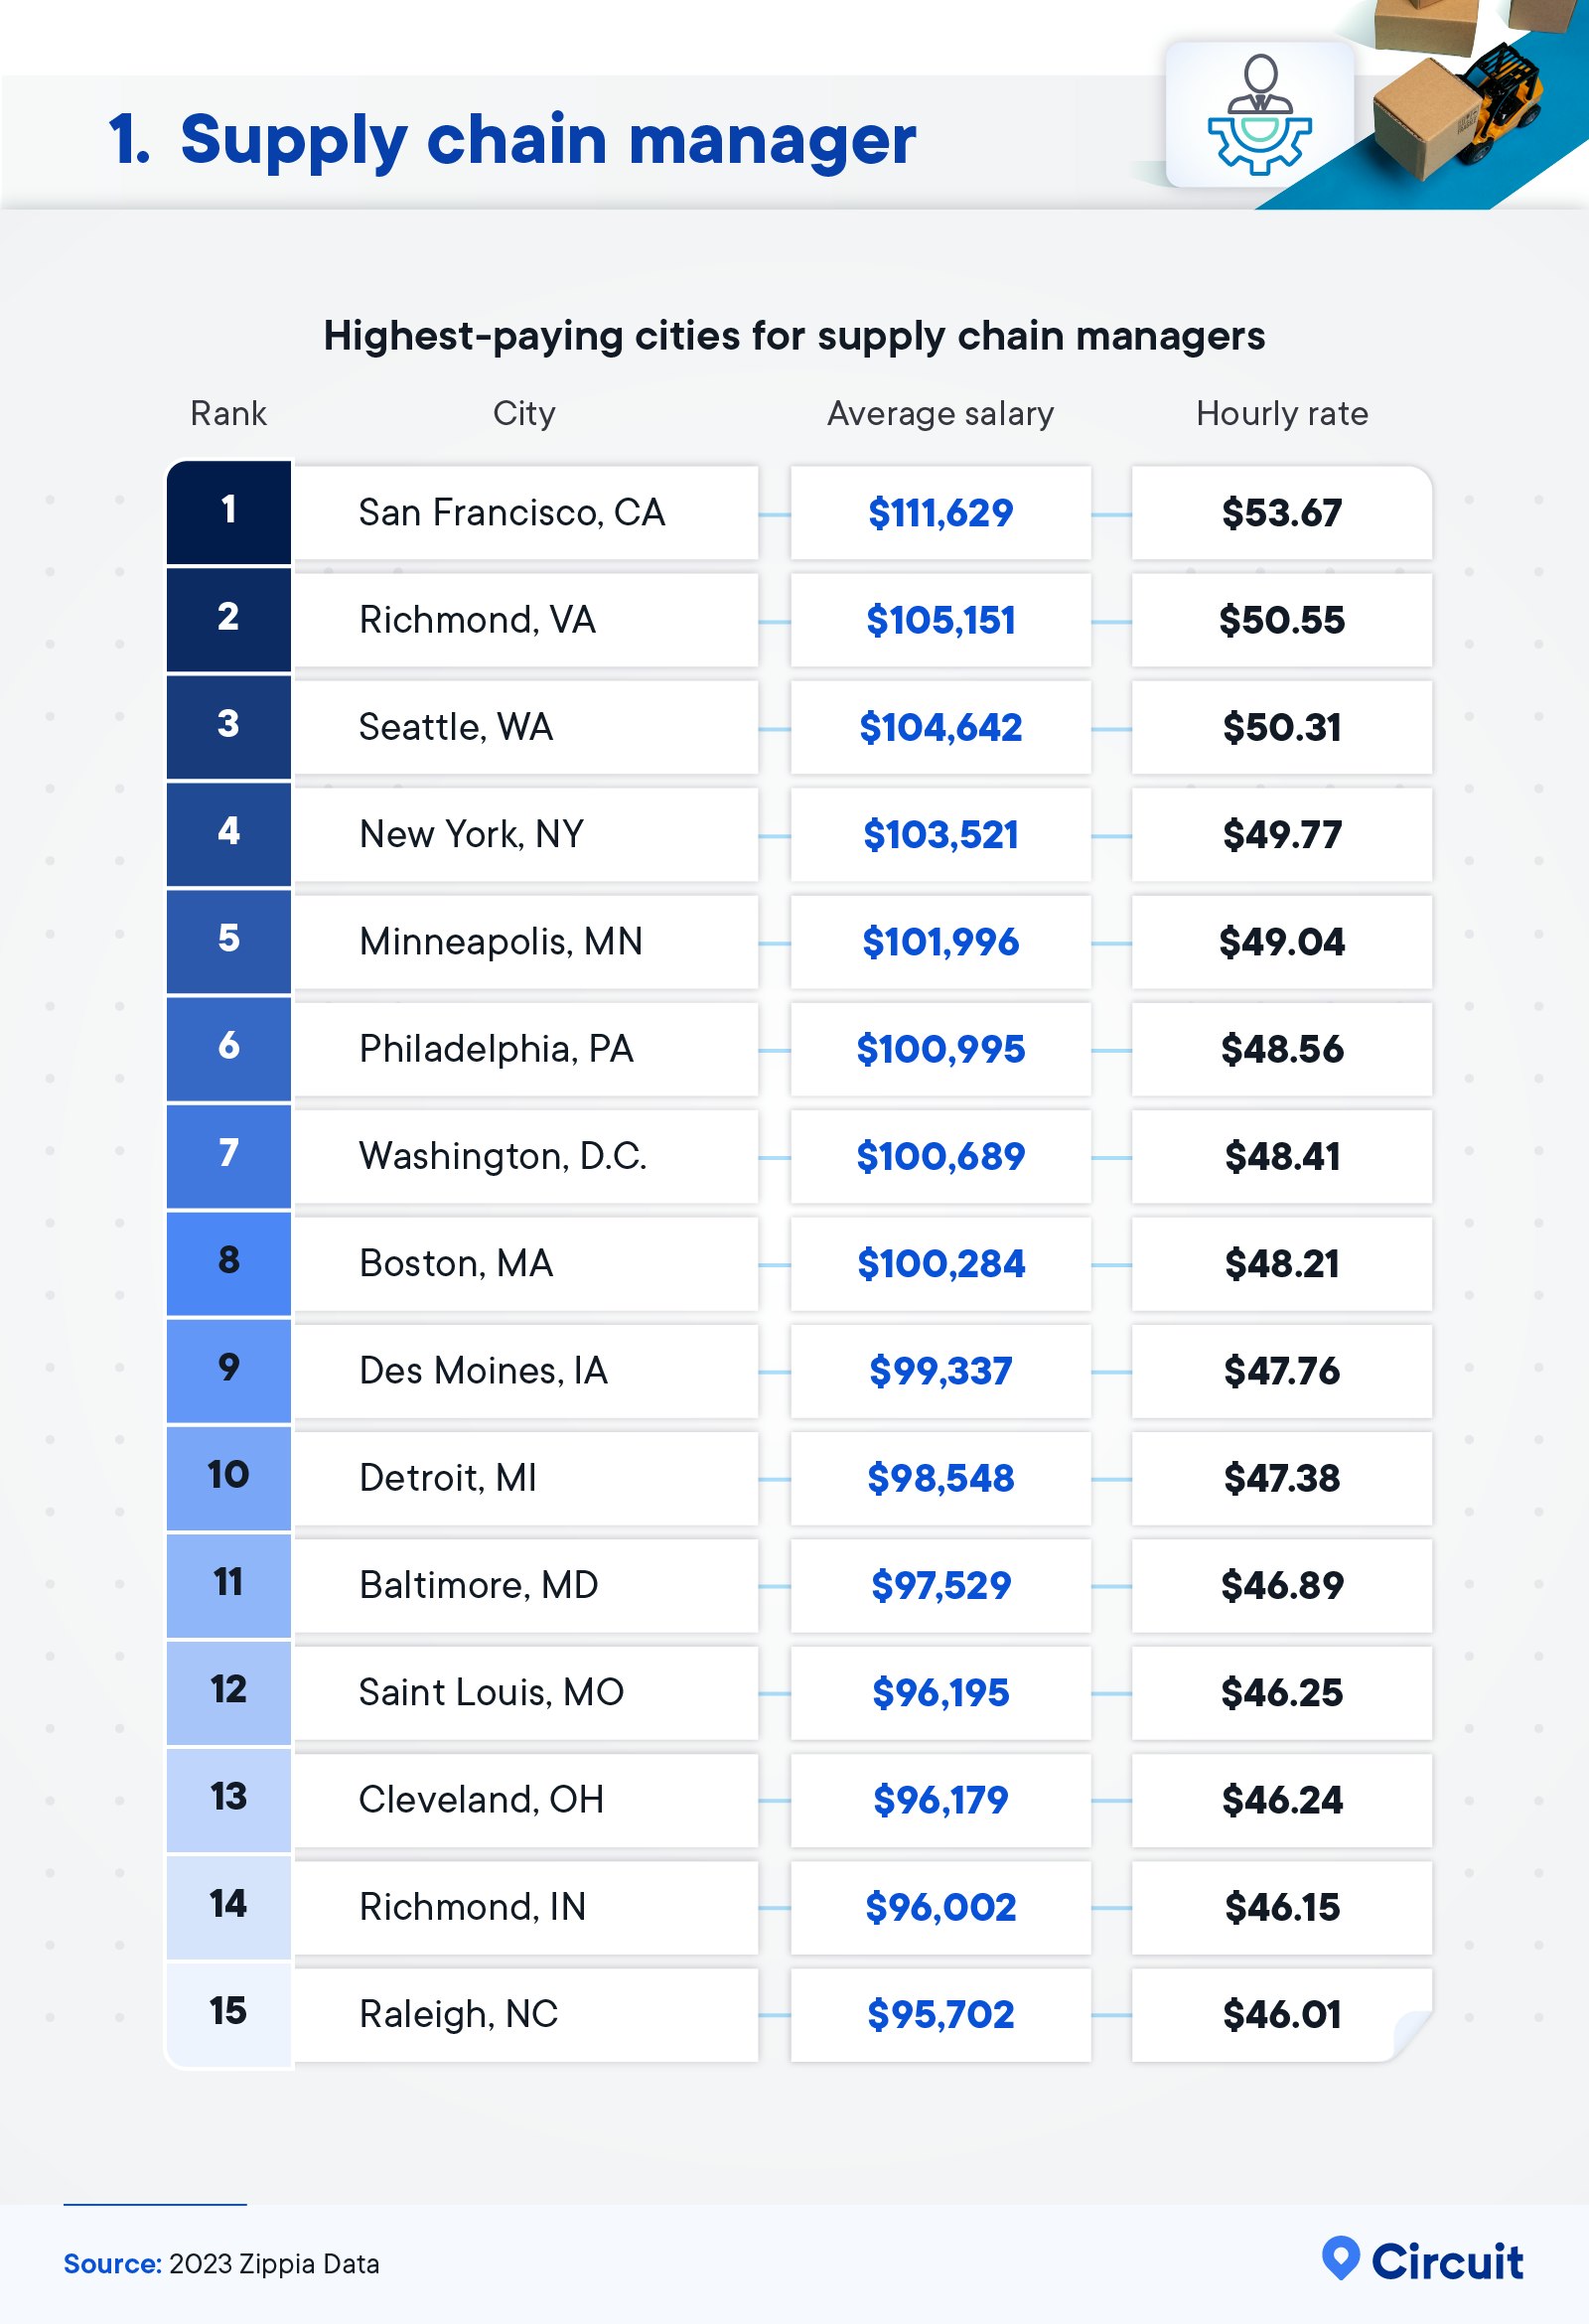 Highest-paying cities for supply chain managers 